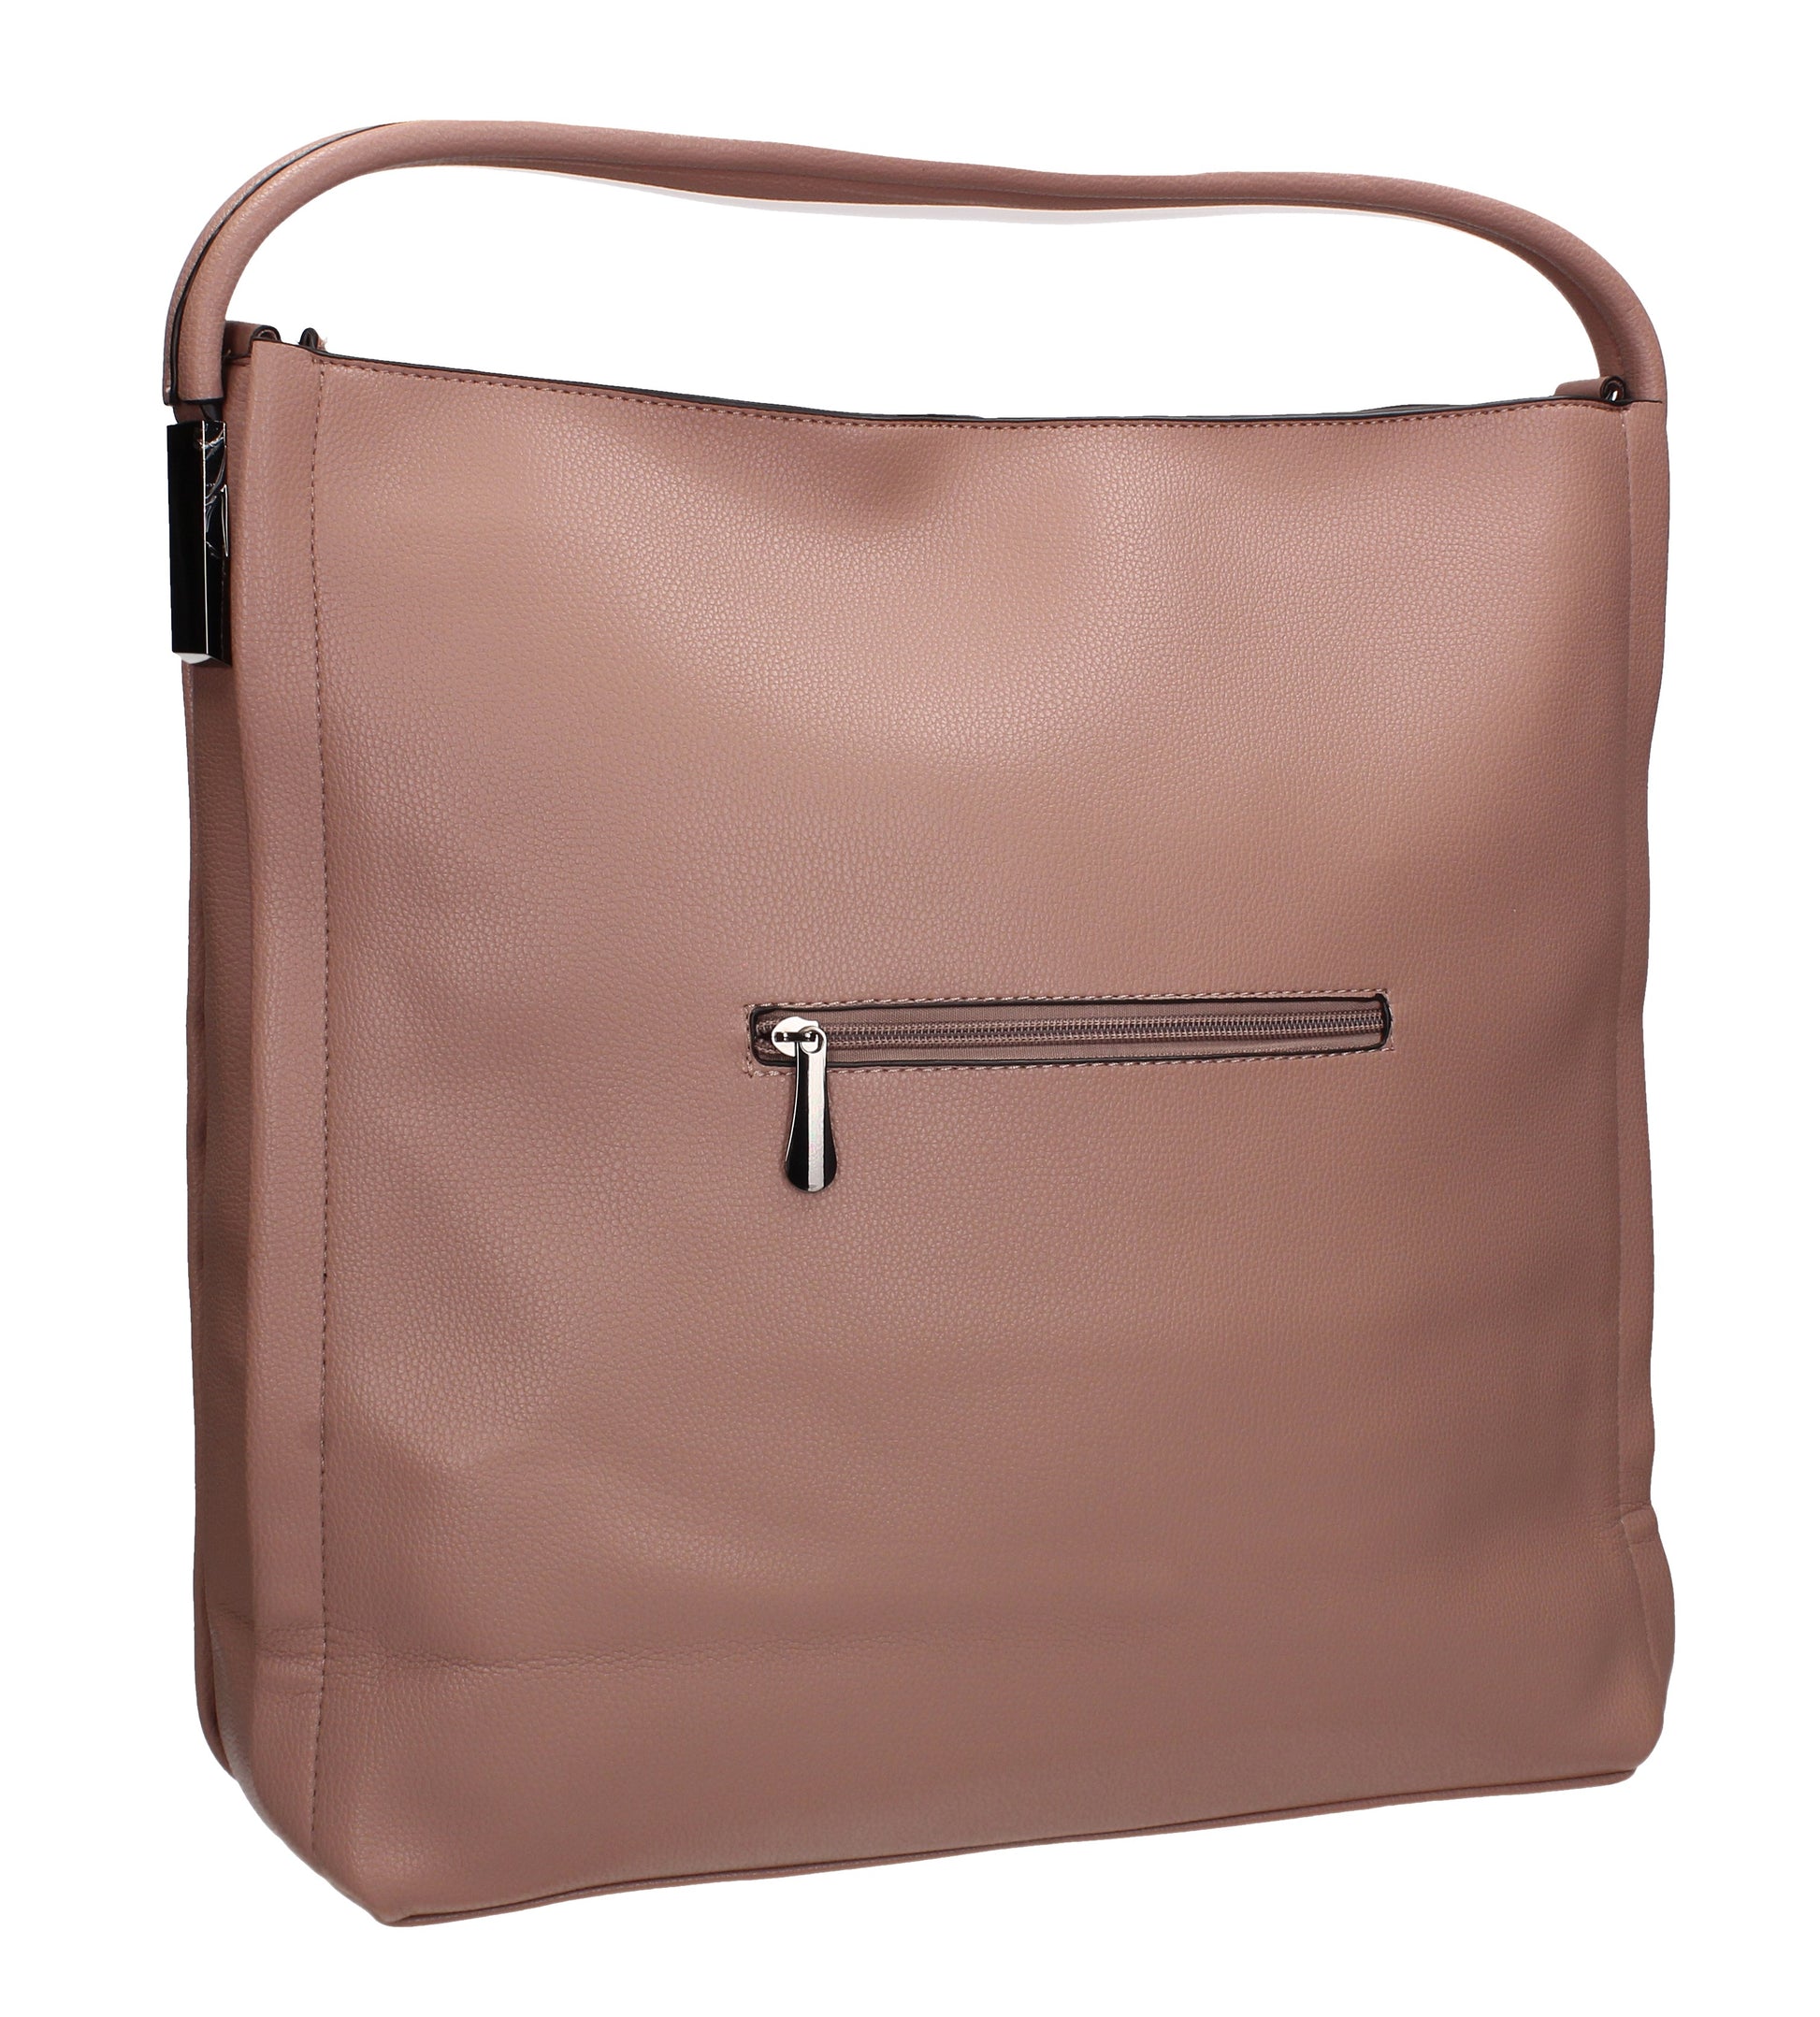 Buy your Alina Handbag Dark Pink Today! Buy with confidence from Swankyswans